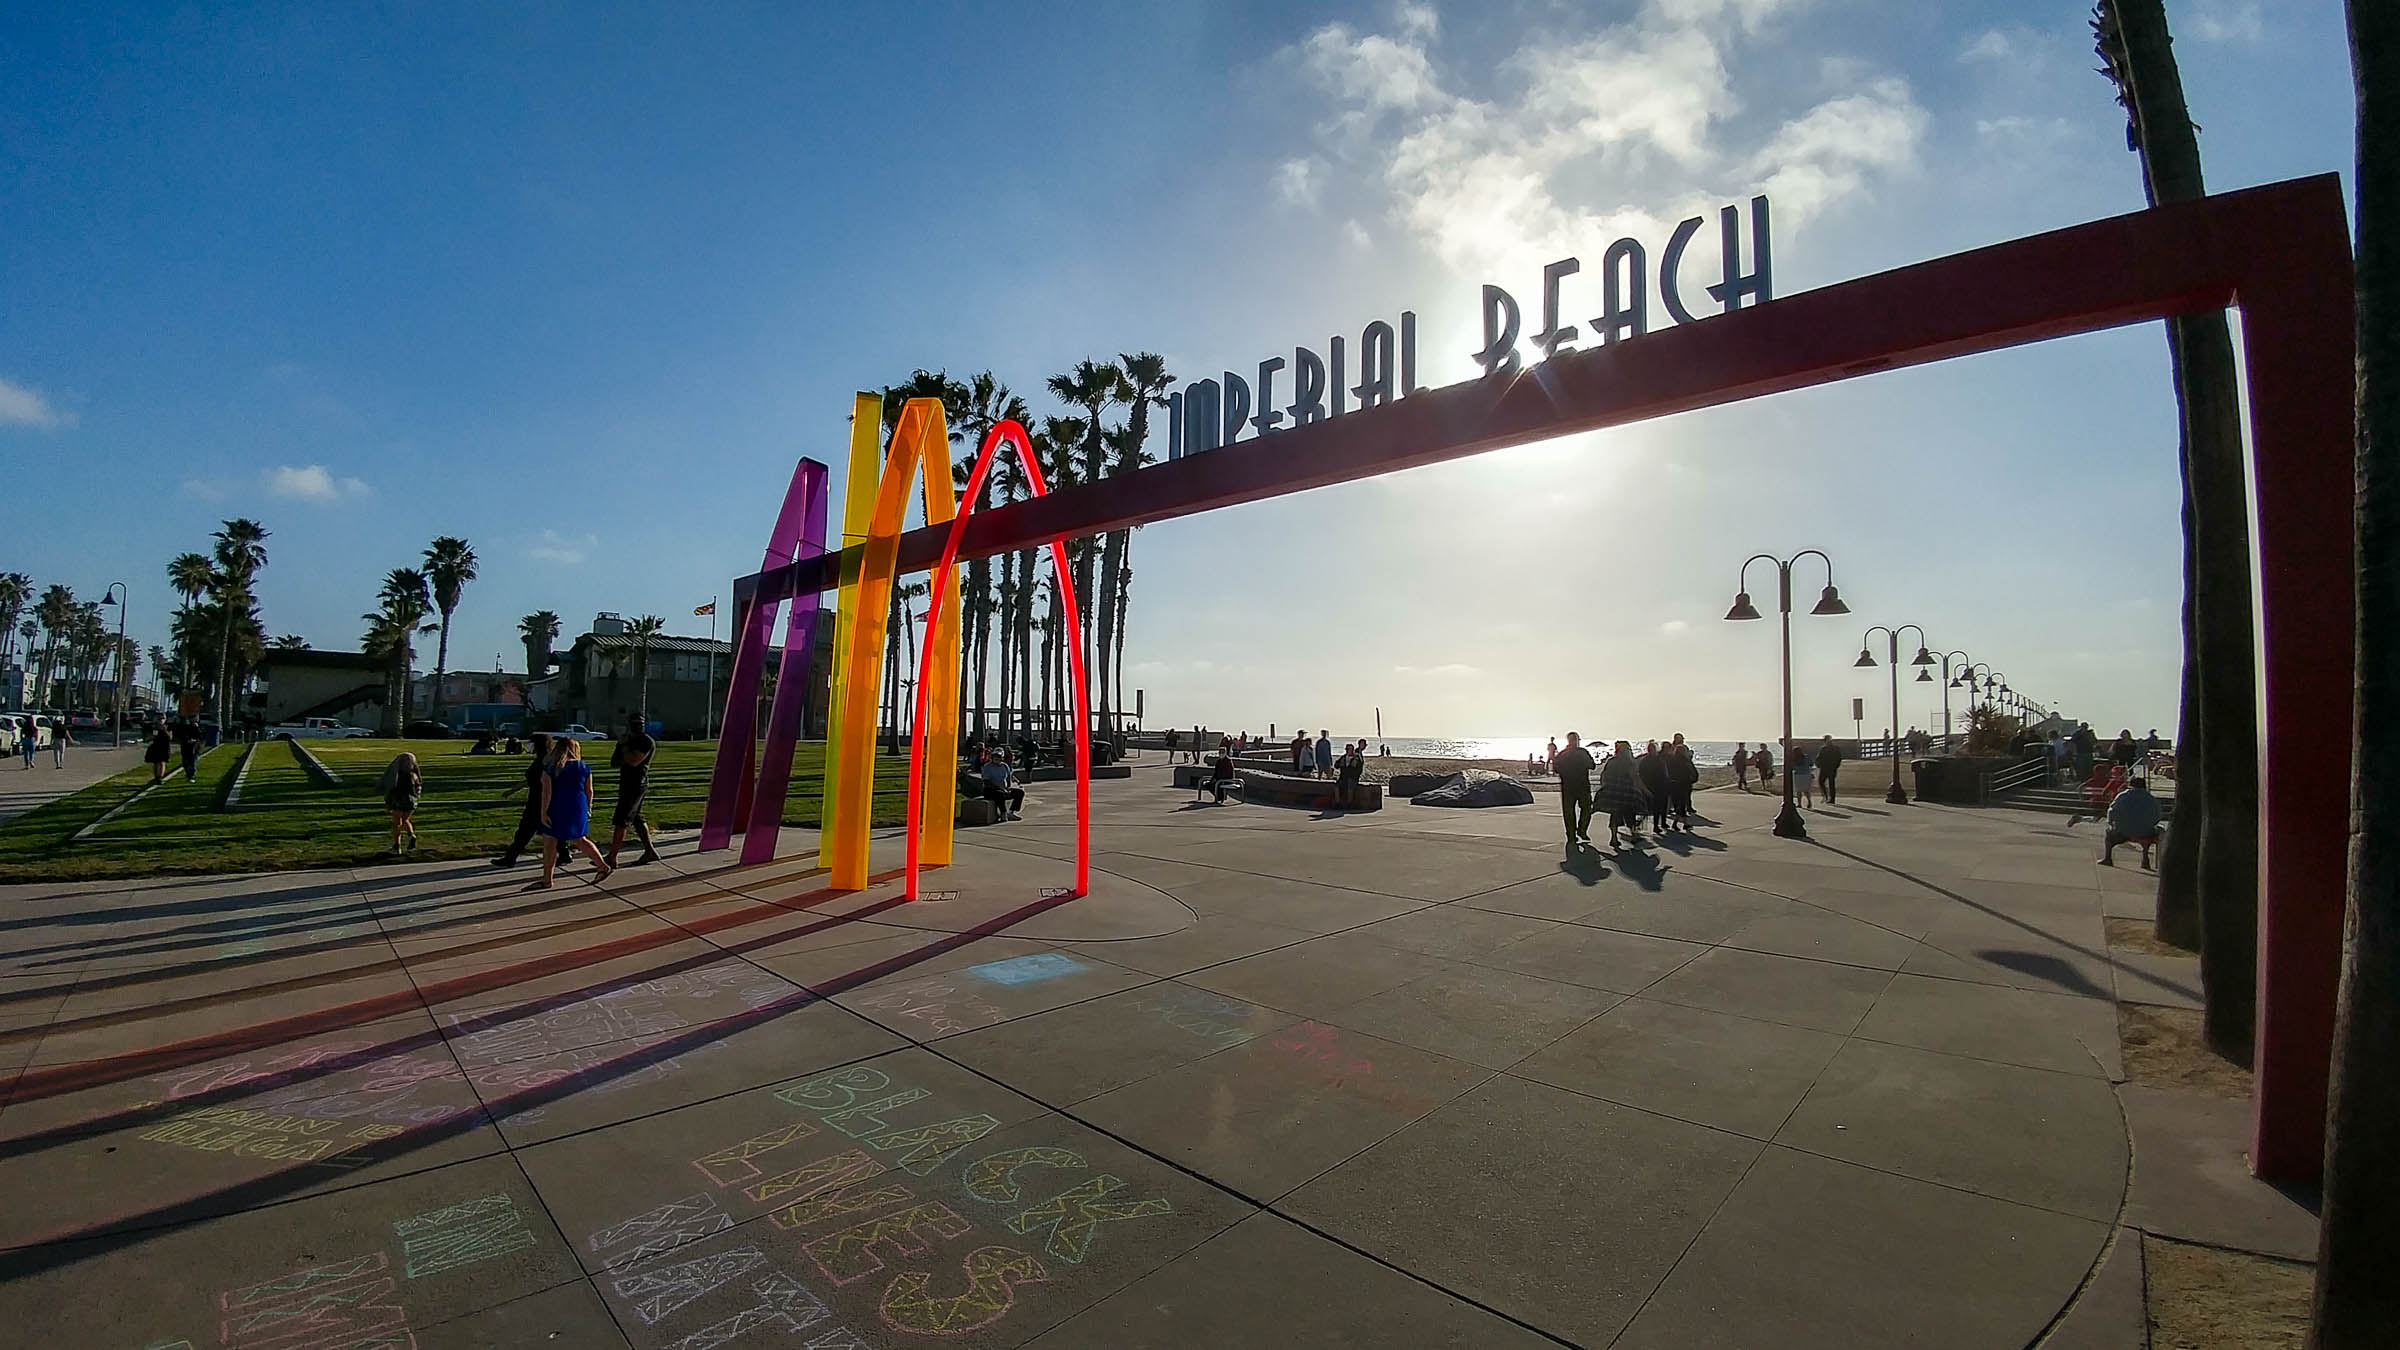 Photo of: Around Town in Imperial Beach